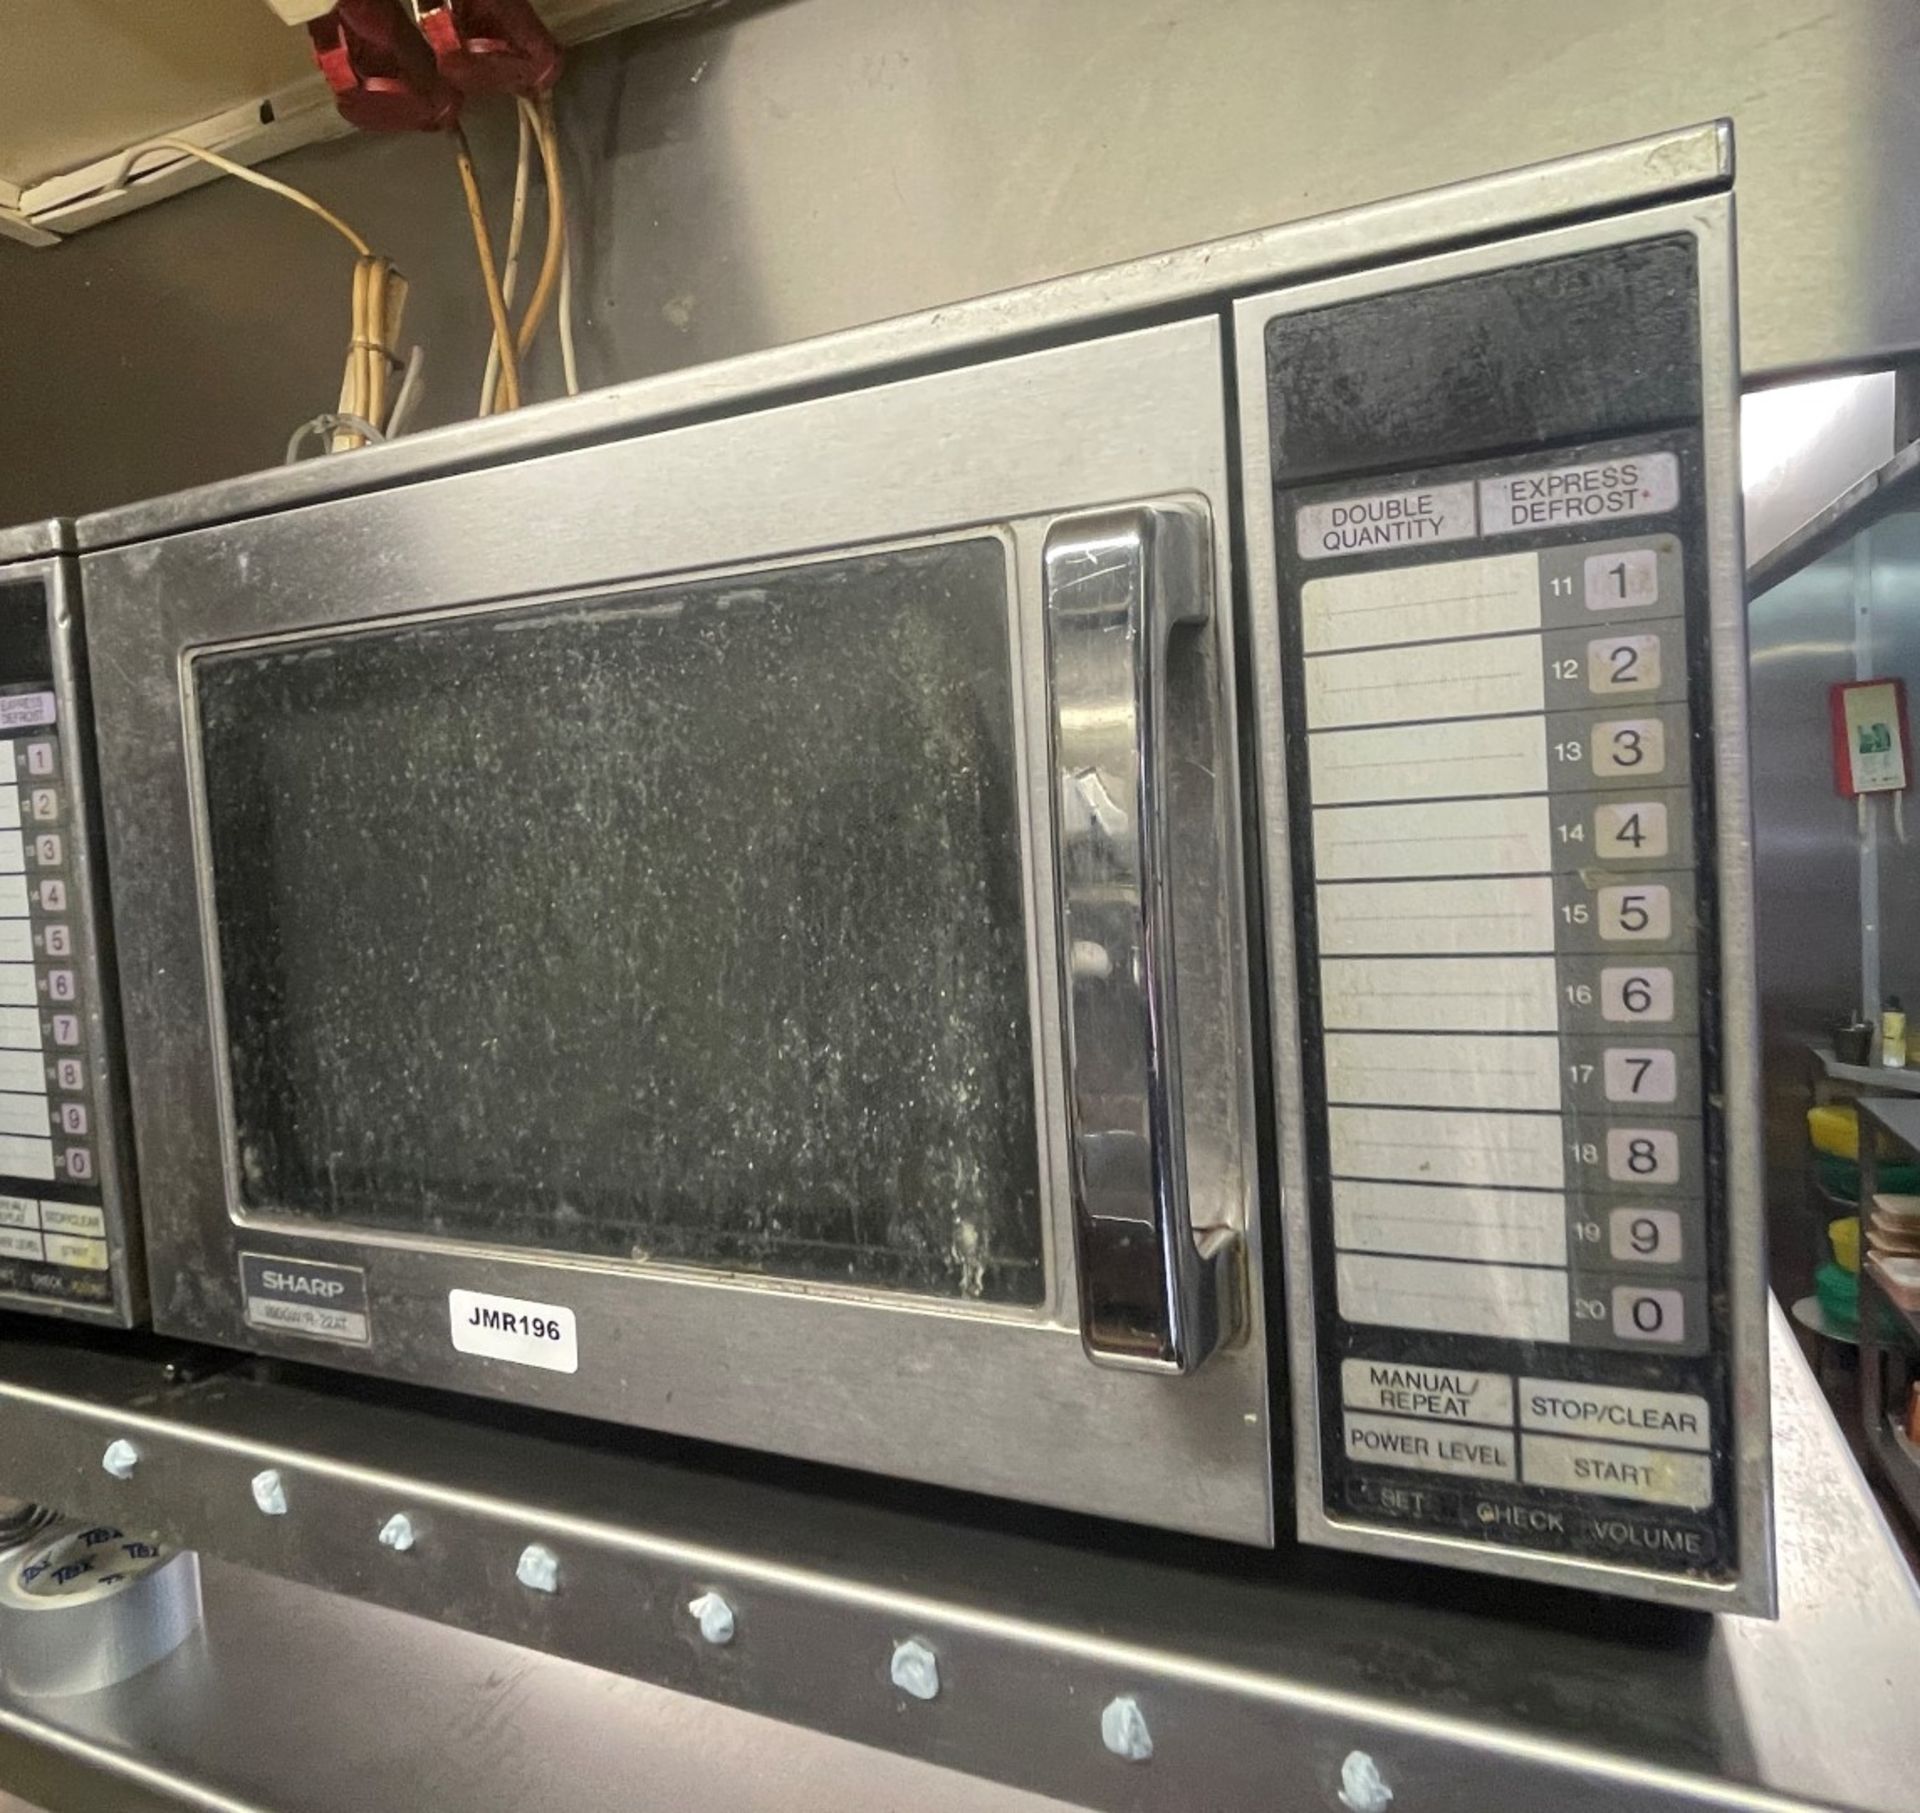 1 x Sharp 1500w Commercial Microwave Oven - Ref: JMR196 - CL782 - Location: Leicester, LE2Collection - Image 4 of 5